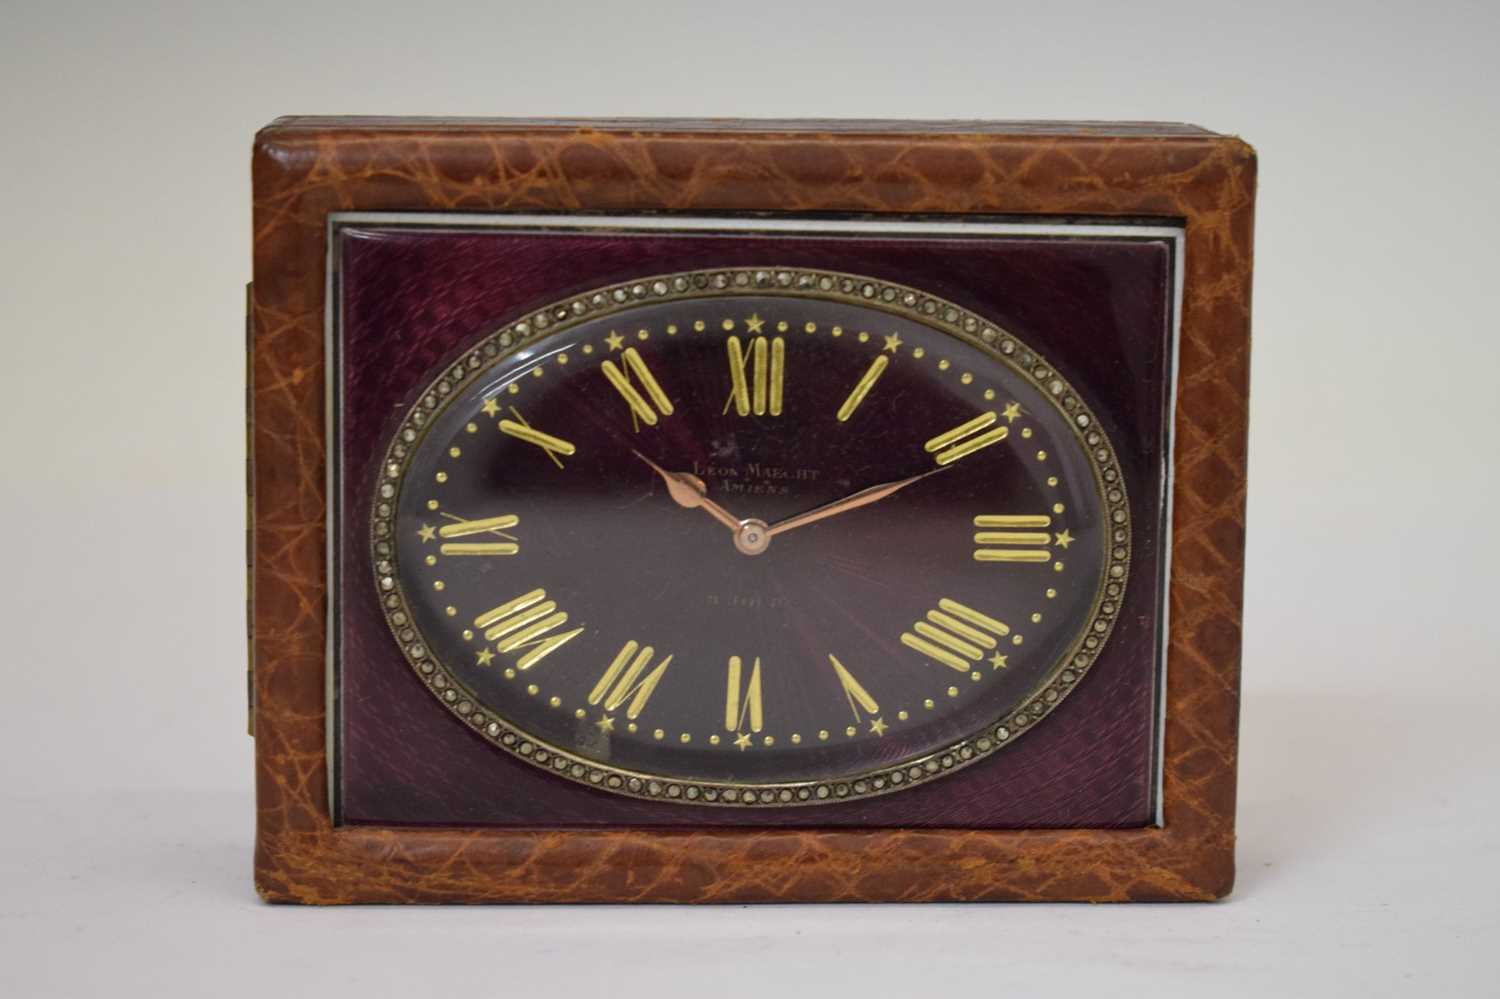 Morocco mounted desk clock and Mappin & Webb gilt metal carriage timepiece - Image 8 of 11